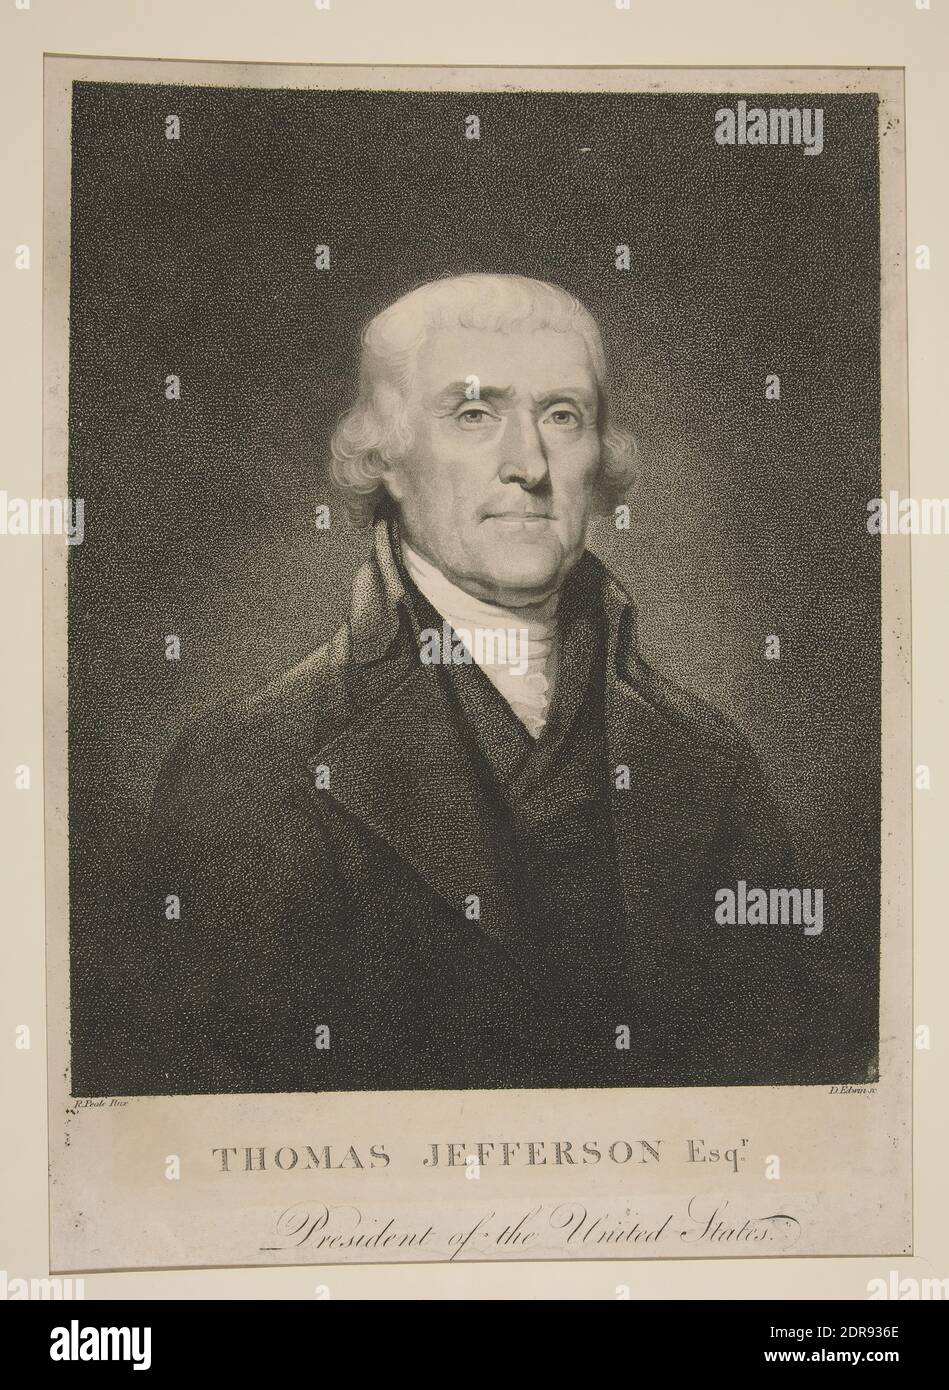 Engraver: David Edwin, American, born England, 1776–1841, After: Rembrandt Peale, American, 1778–1860, Thomas Jefferson Esq., Stipple engraving, Sheet: 41 × 27.2 cm (16 1/8 × 10 11/16 in.), Made in United States, American, 19th century, Works on Paper - Prints Stock Photo